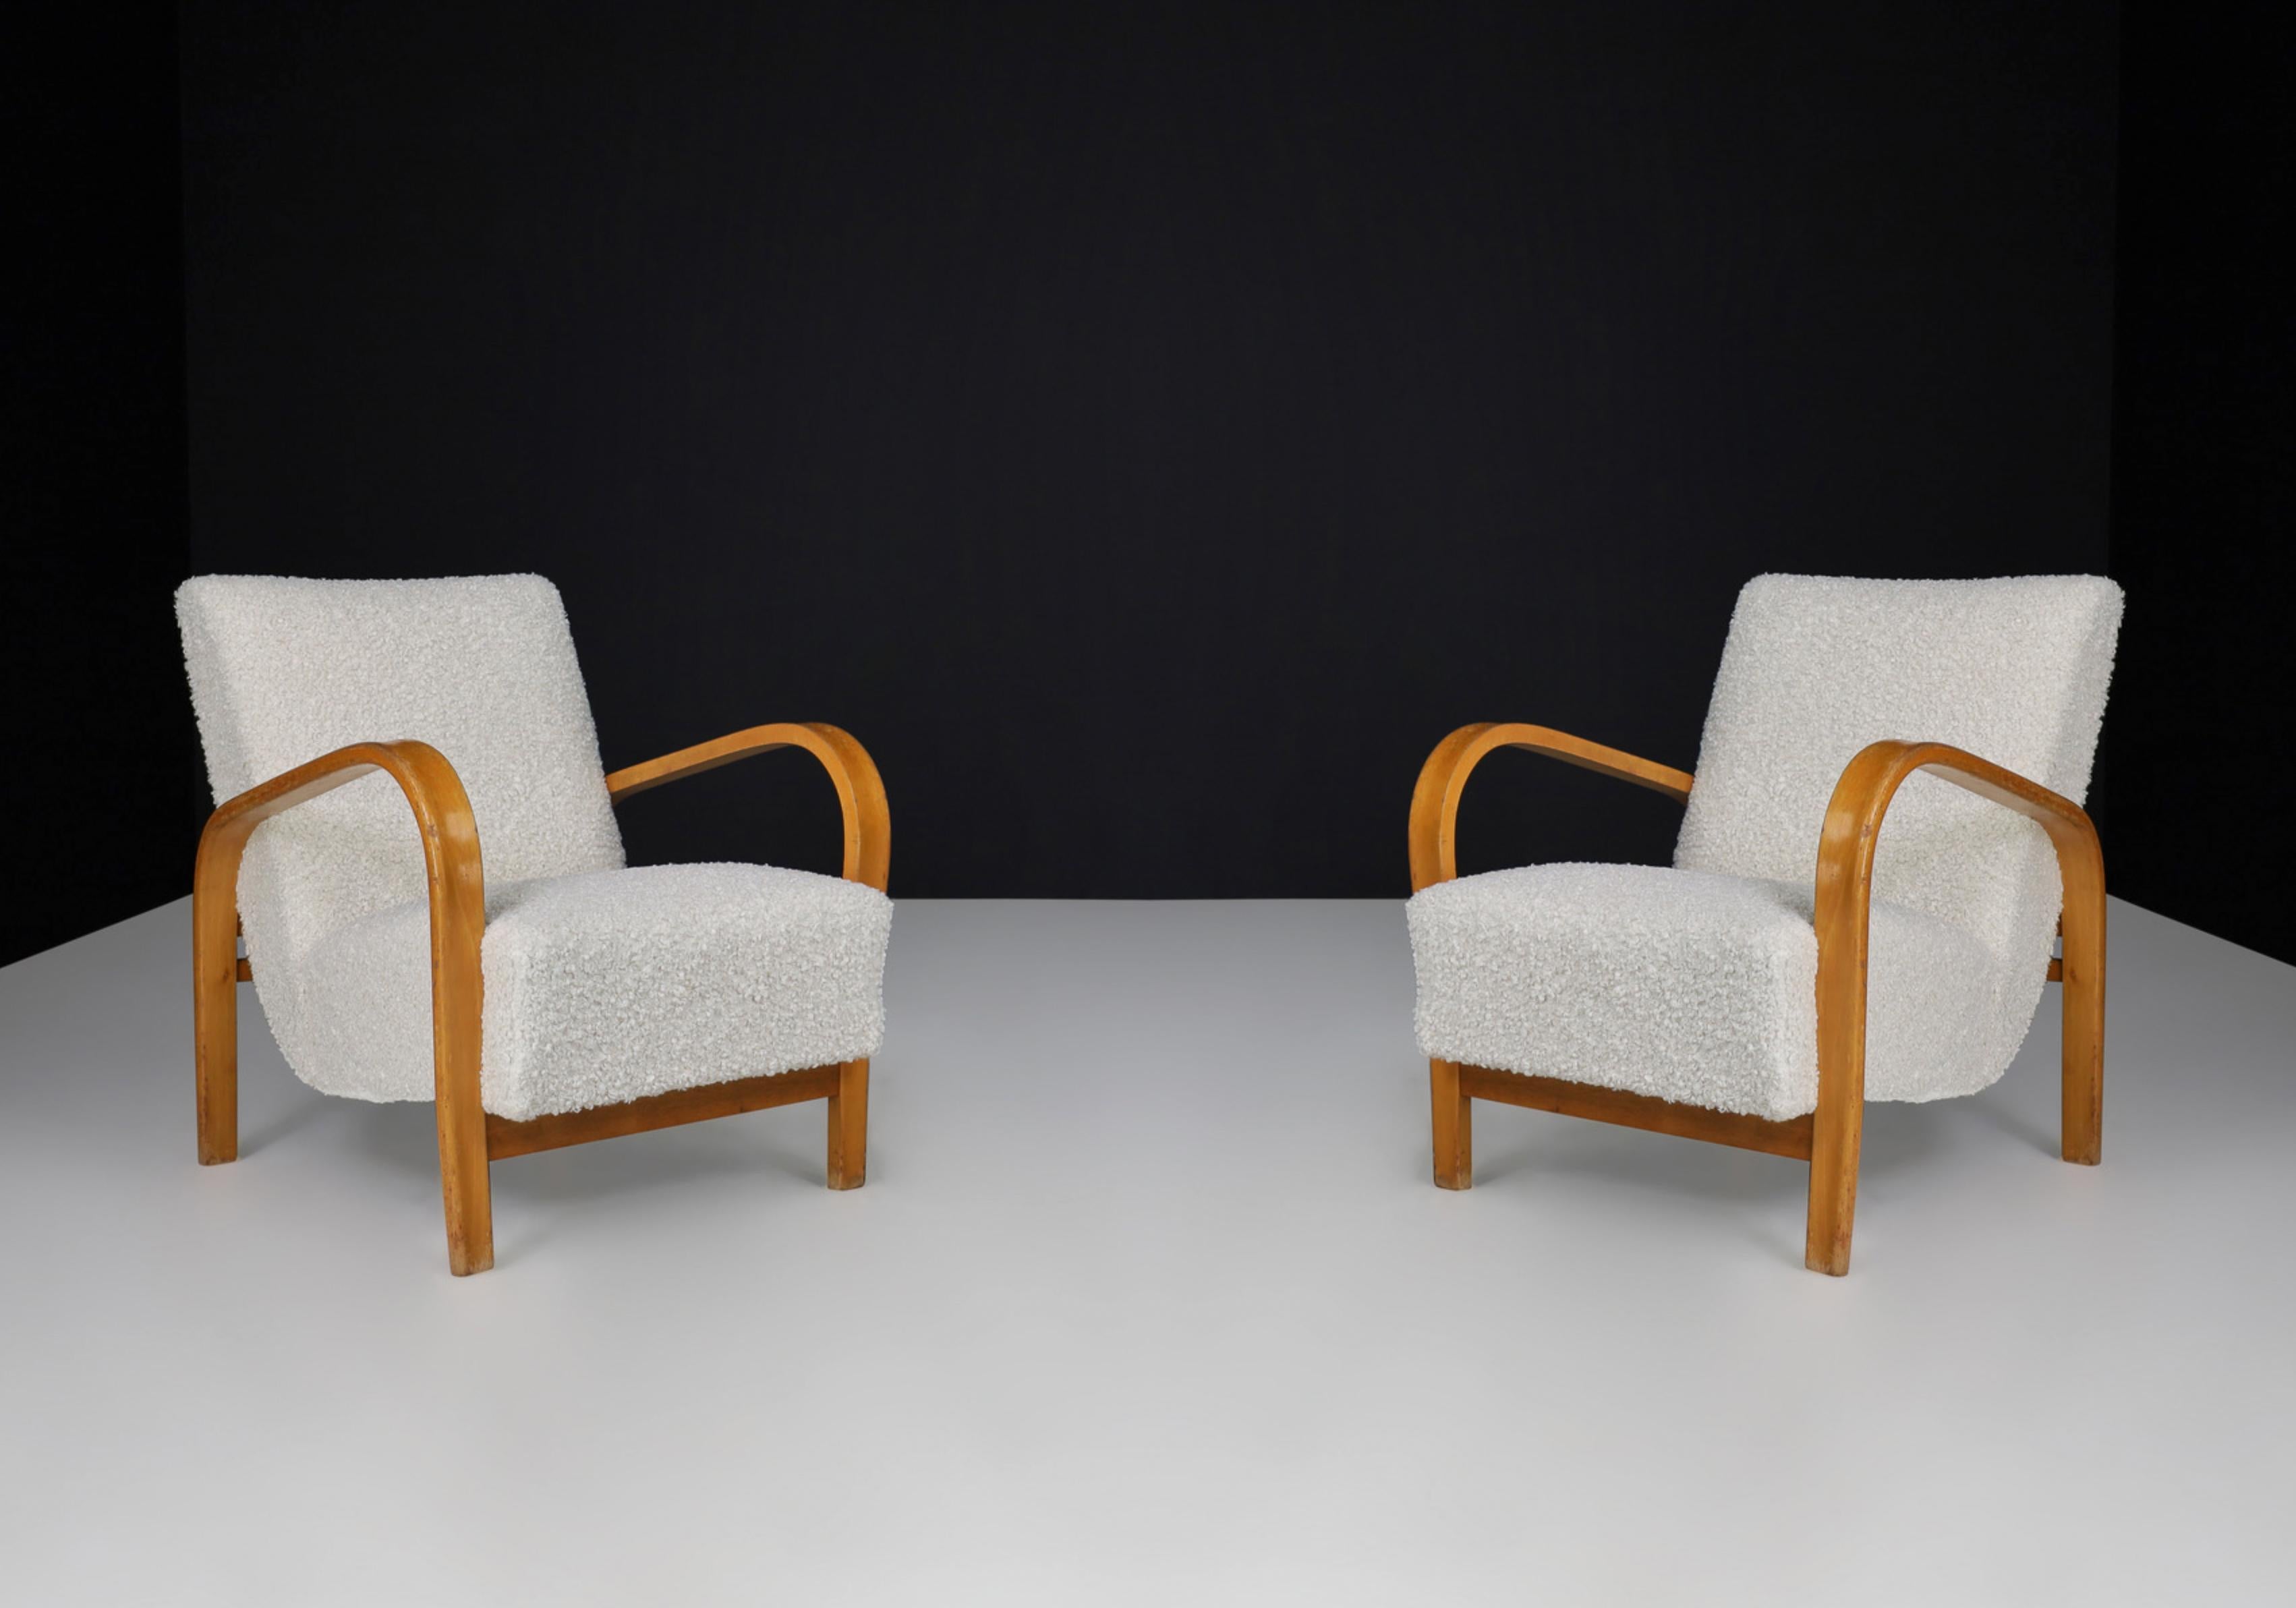 Karel Koželka & Antonín Kropáček re-upholstered bentwood Armchairs, Czechia 1940

We offer re-upholstered Karel Koželka & Antonín Kropáček bentwood armchairs, originally designed in Czechia circa 1940. These iconic chairs are a benchmark for